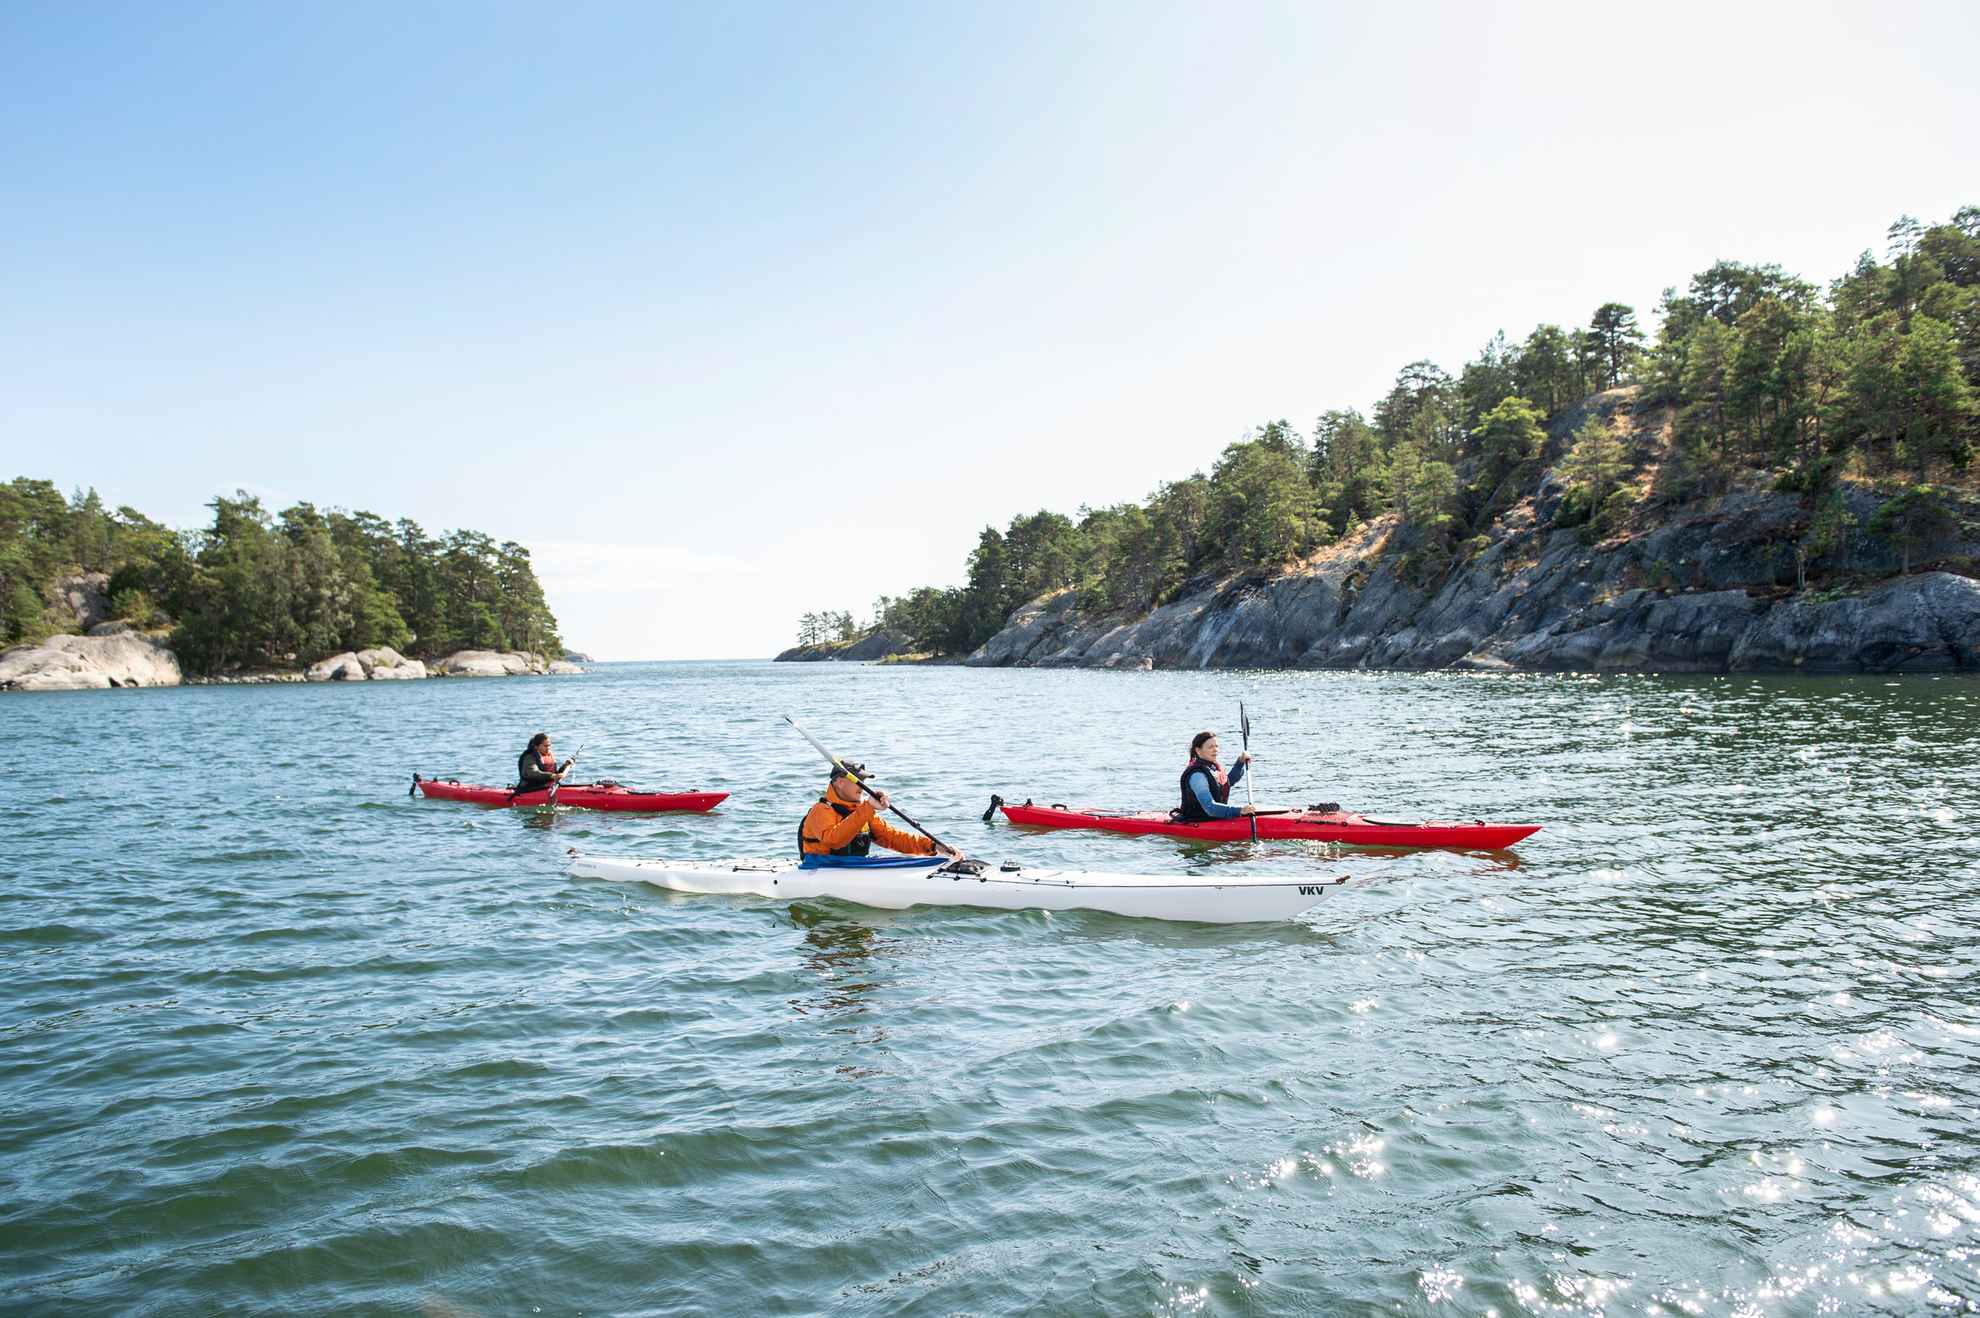 Three persons kayaking between islets in the archipelago.